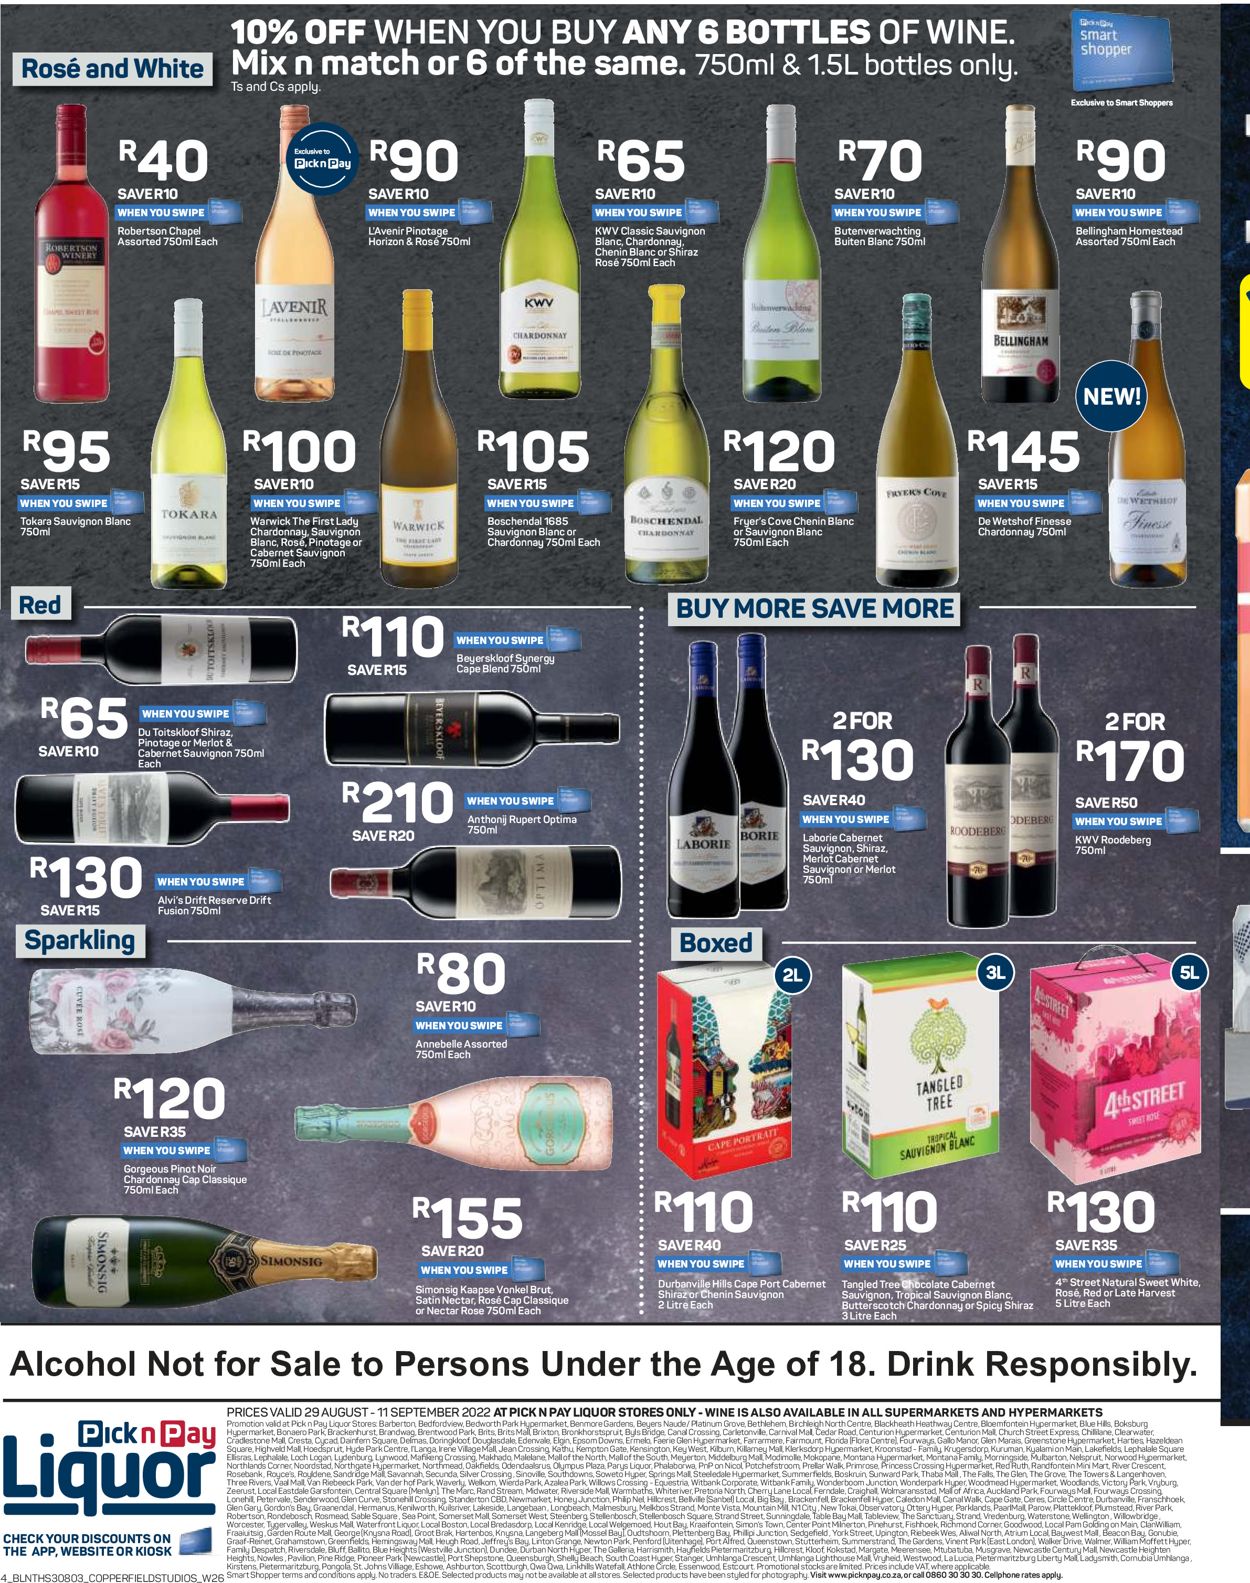 Pick n Pay Catalogue - 2022/08/29-2022/09/11 (Page 4)